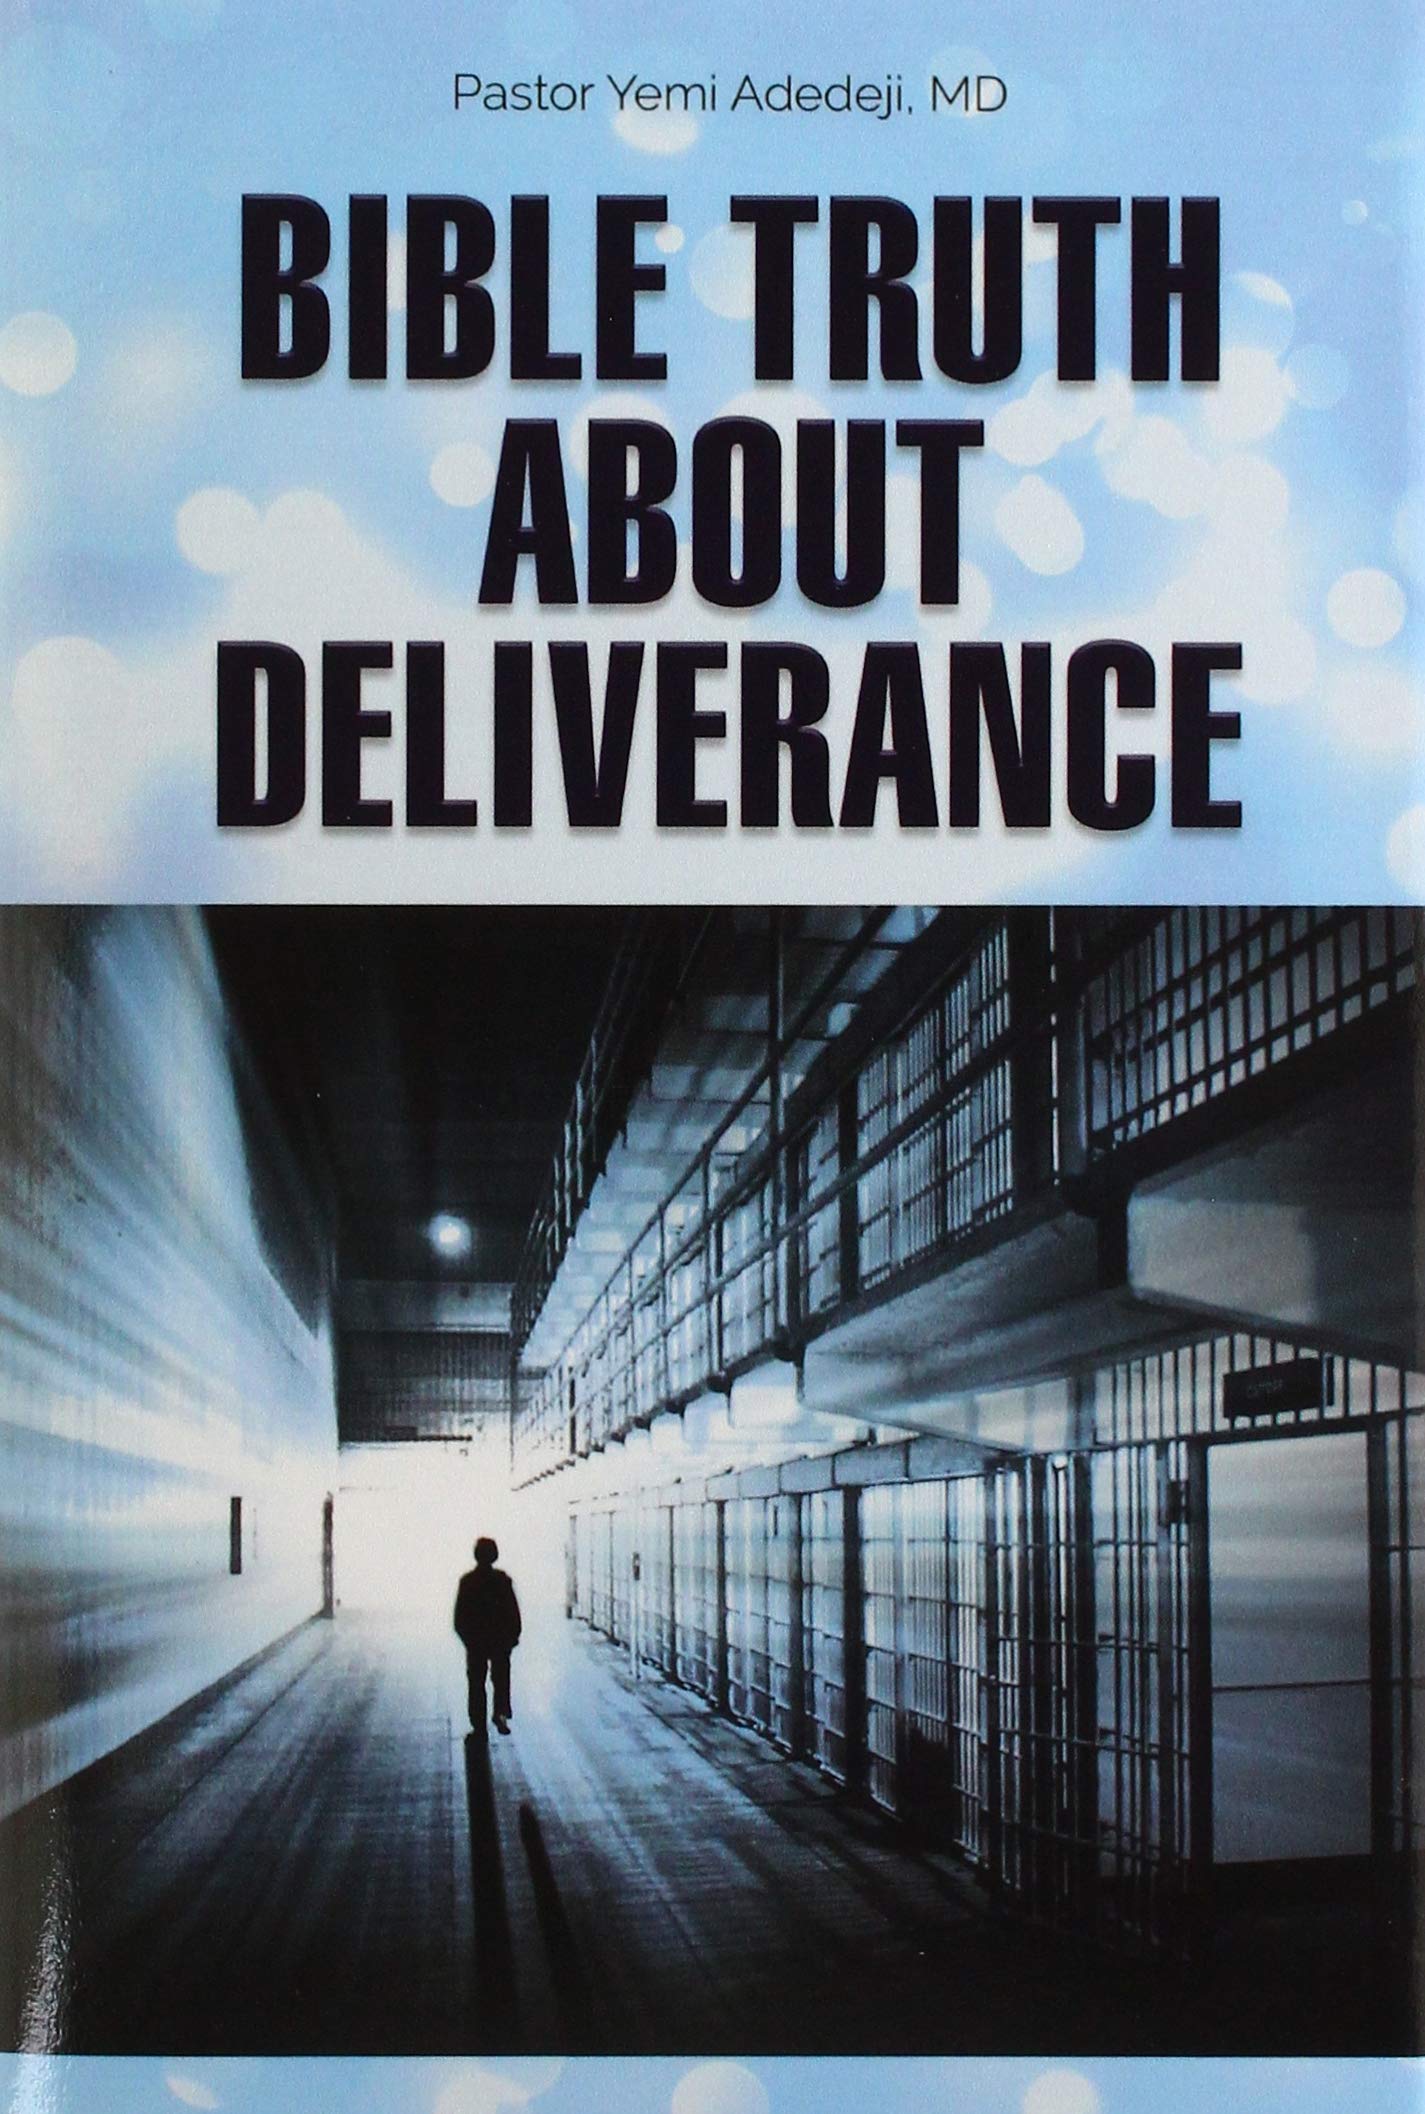 "Bible Truth About Deliverance" Explore True Meaning of Deliverance for Everyone